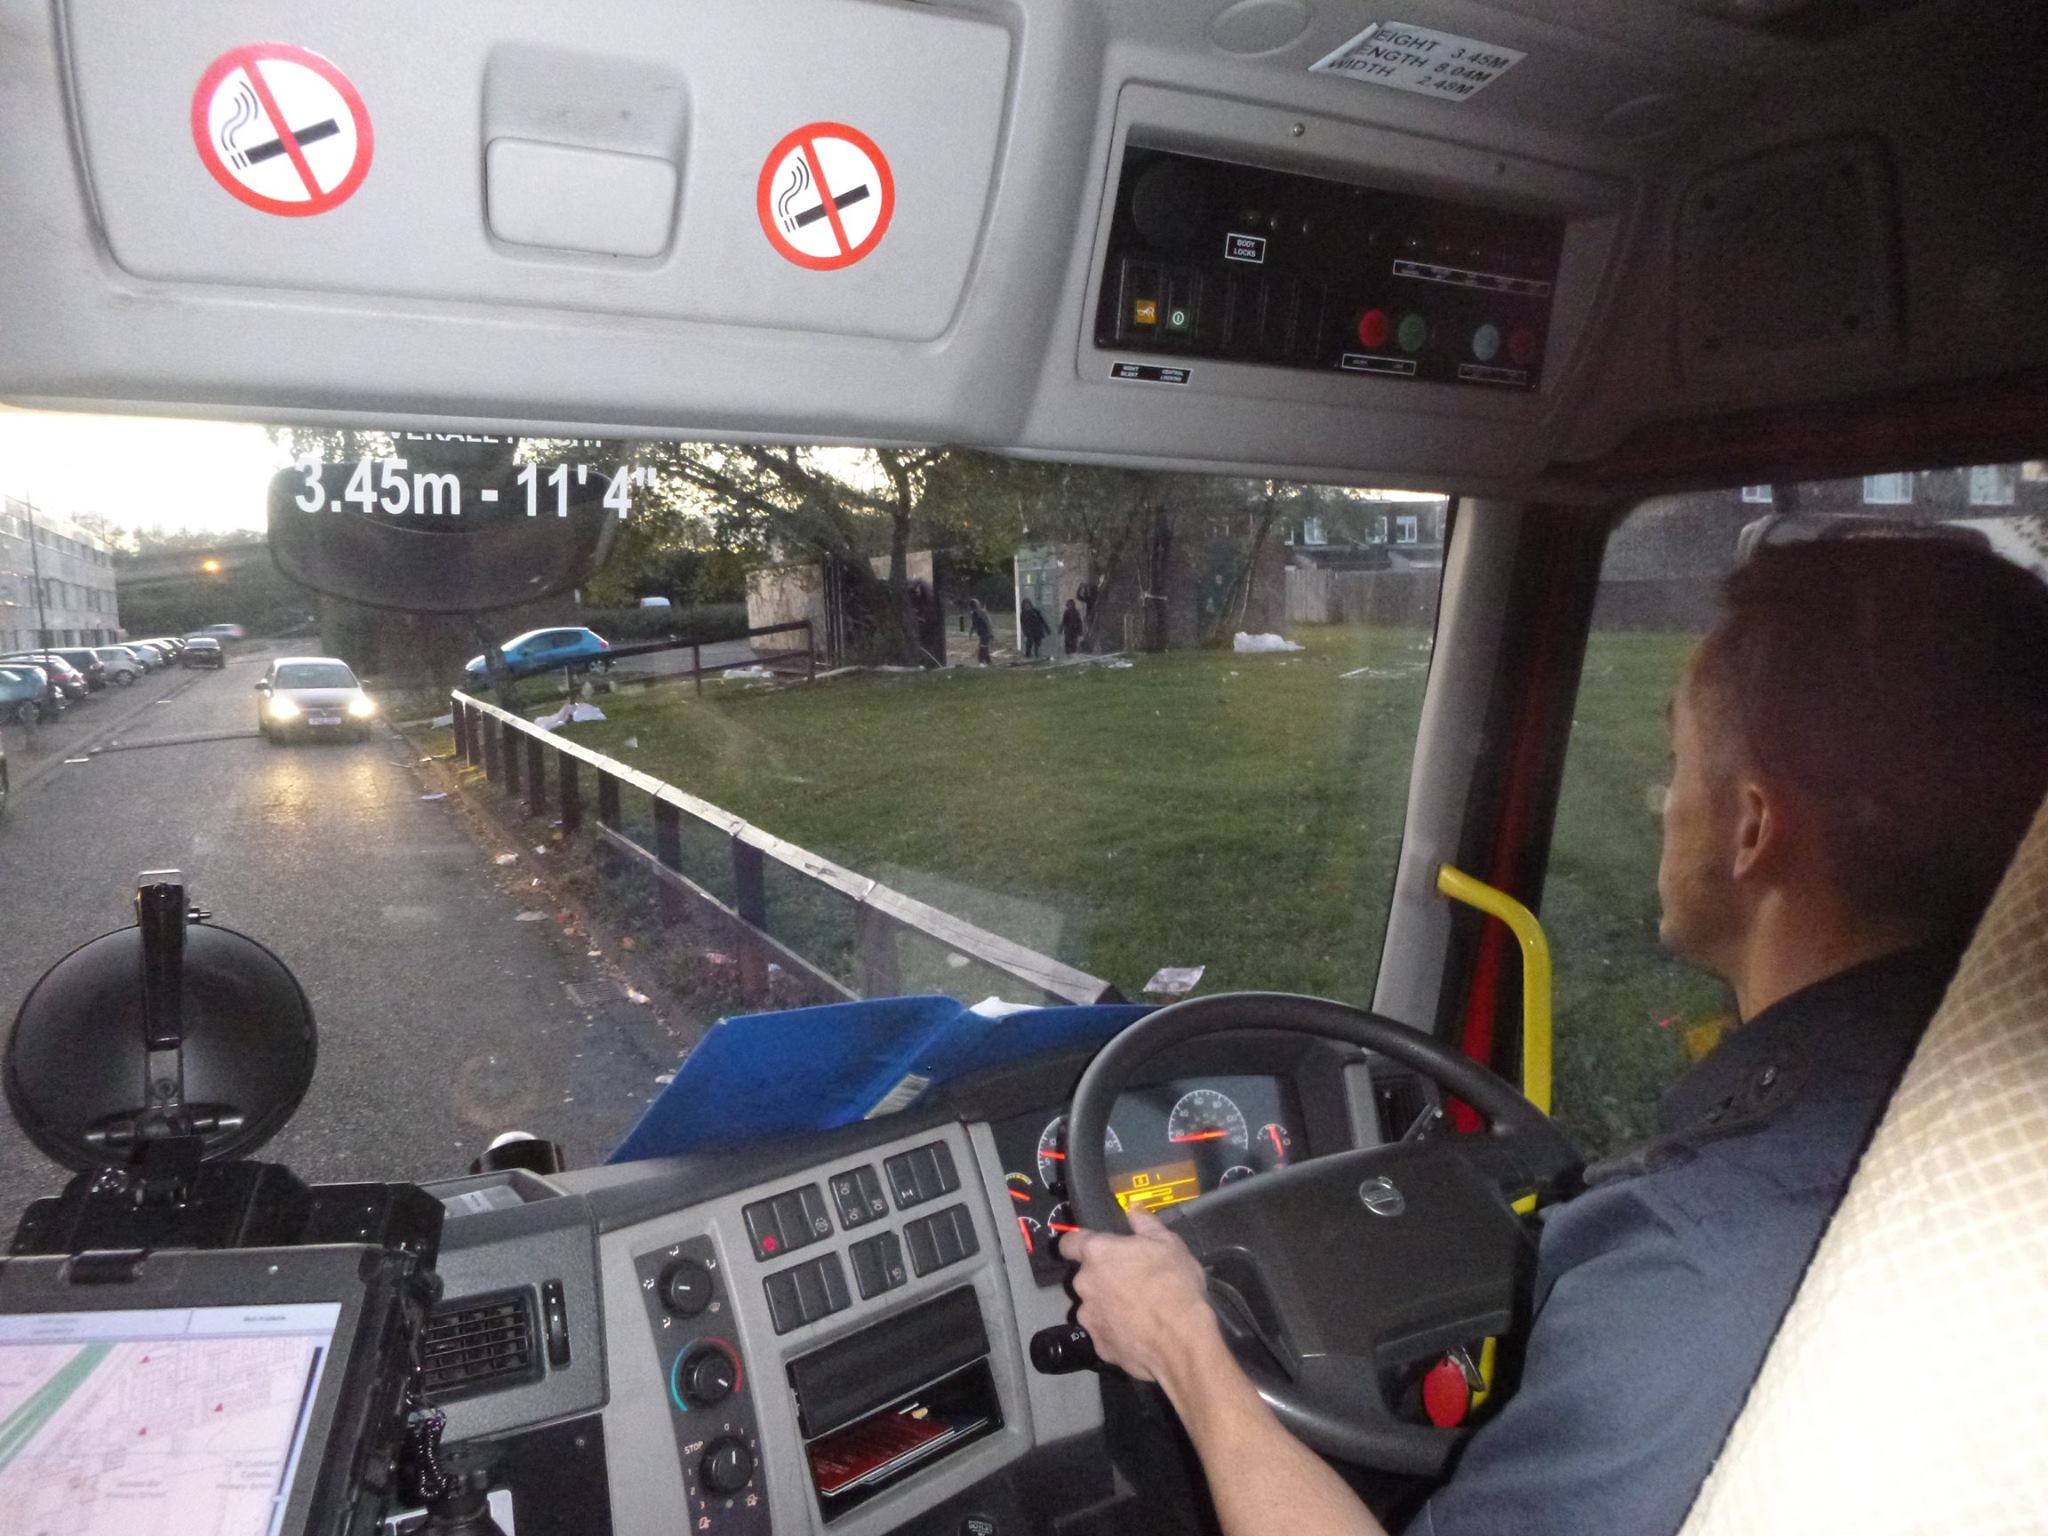 The view over the driver's shoulder of young people throwing missiles at a fire engine